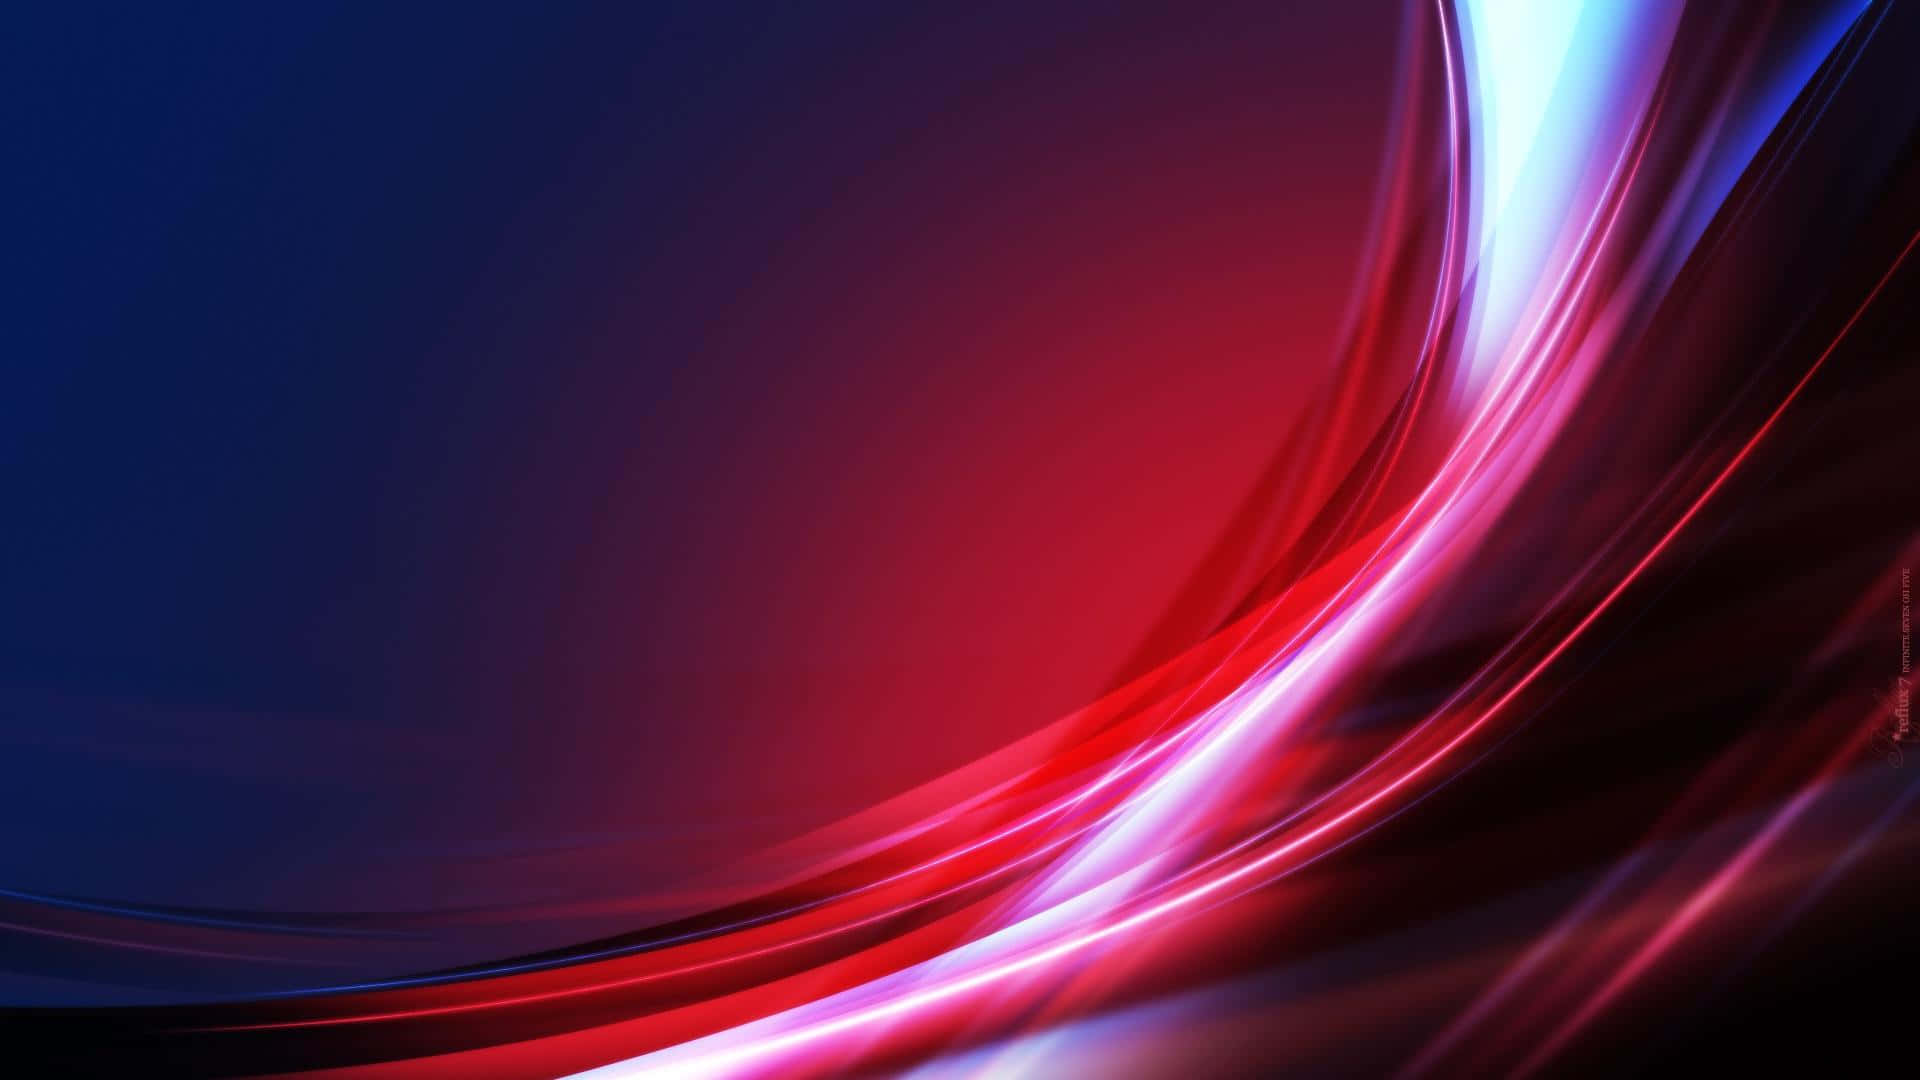 A Red And Blue Abstract Background With A Wave